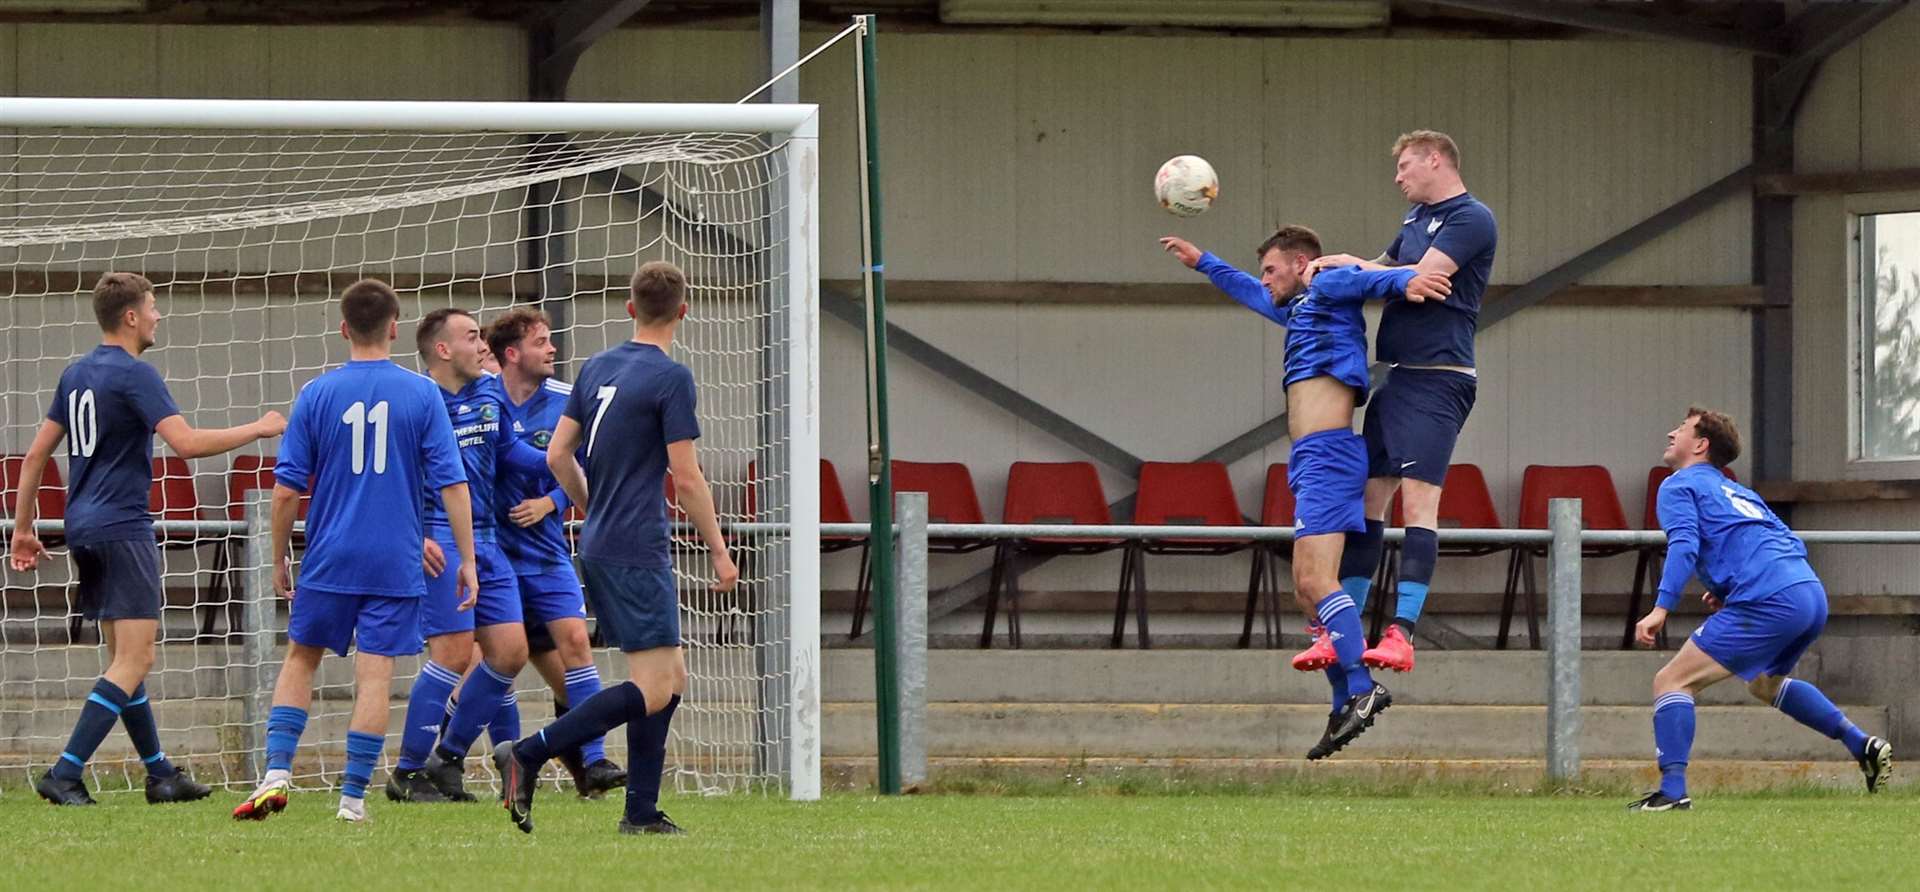 Aidan Reid rises above Danny Coghill to score High Ormlie's first goal against Wick Thistle with a powerful header. Picture: James Gunn